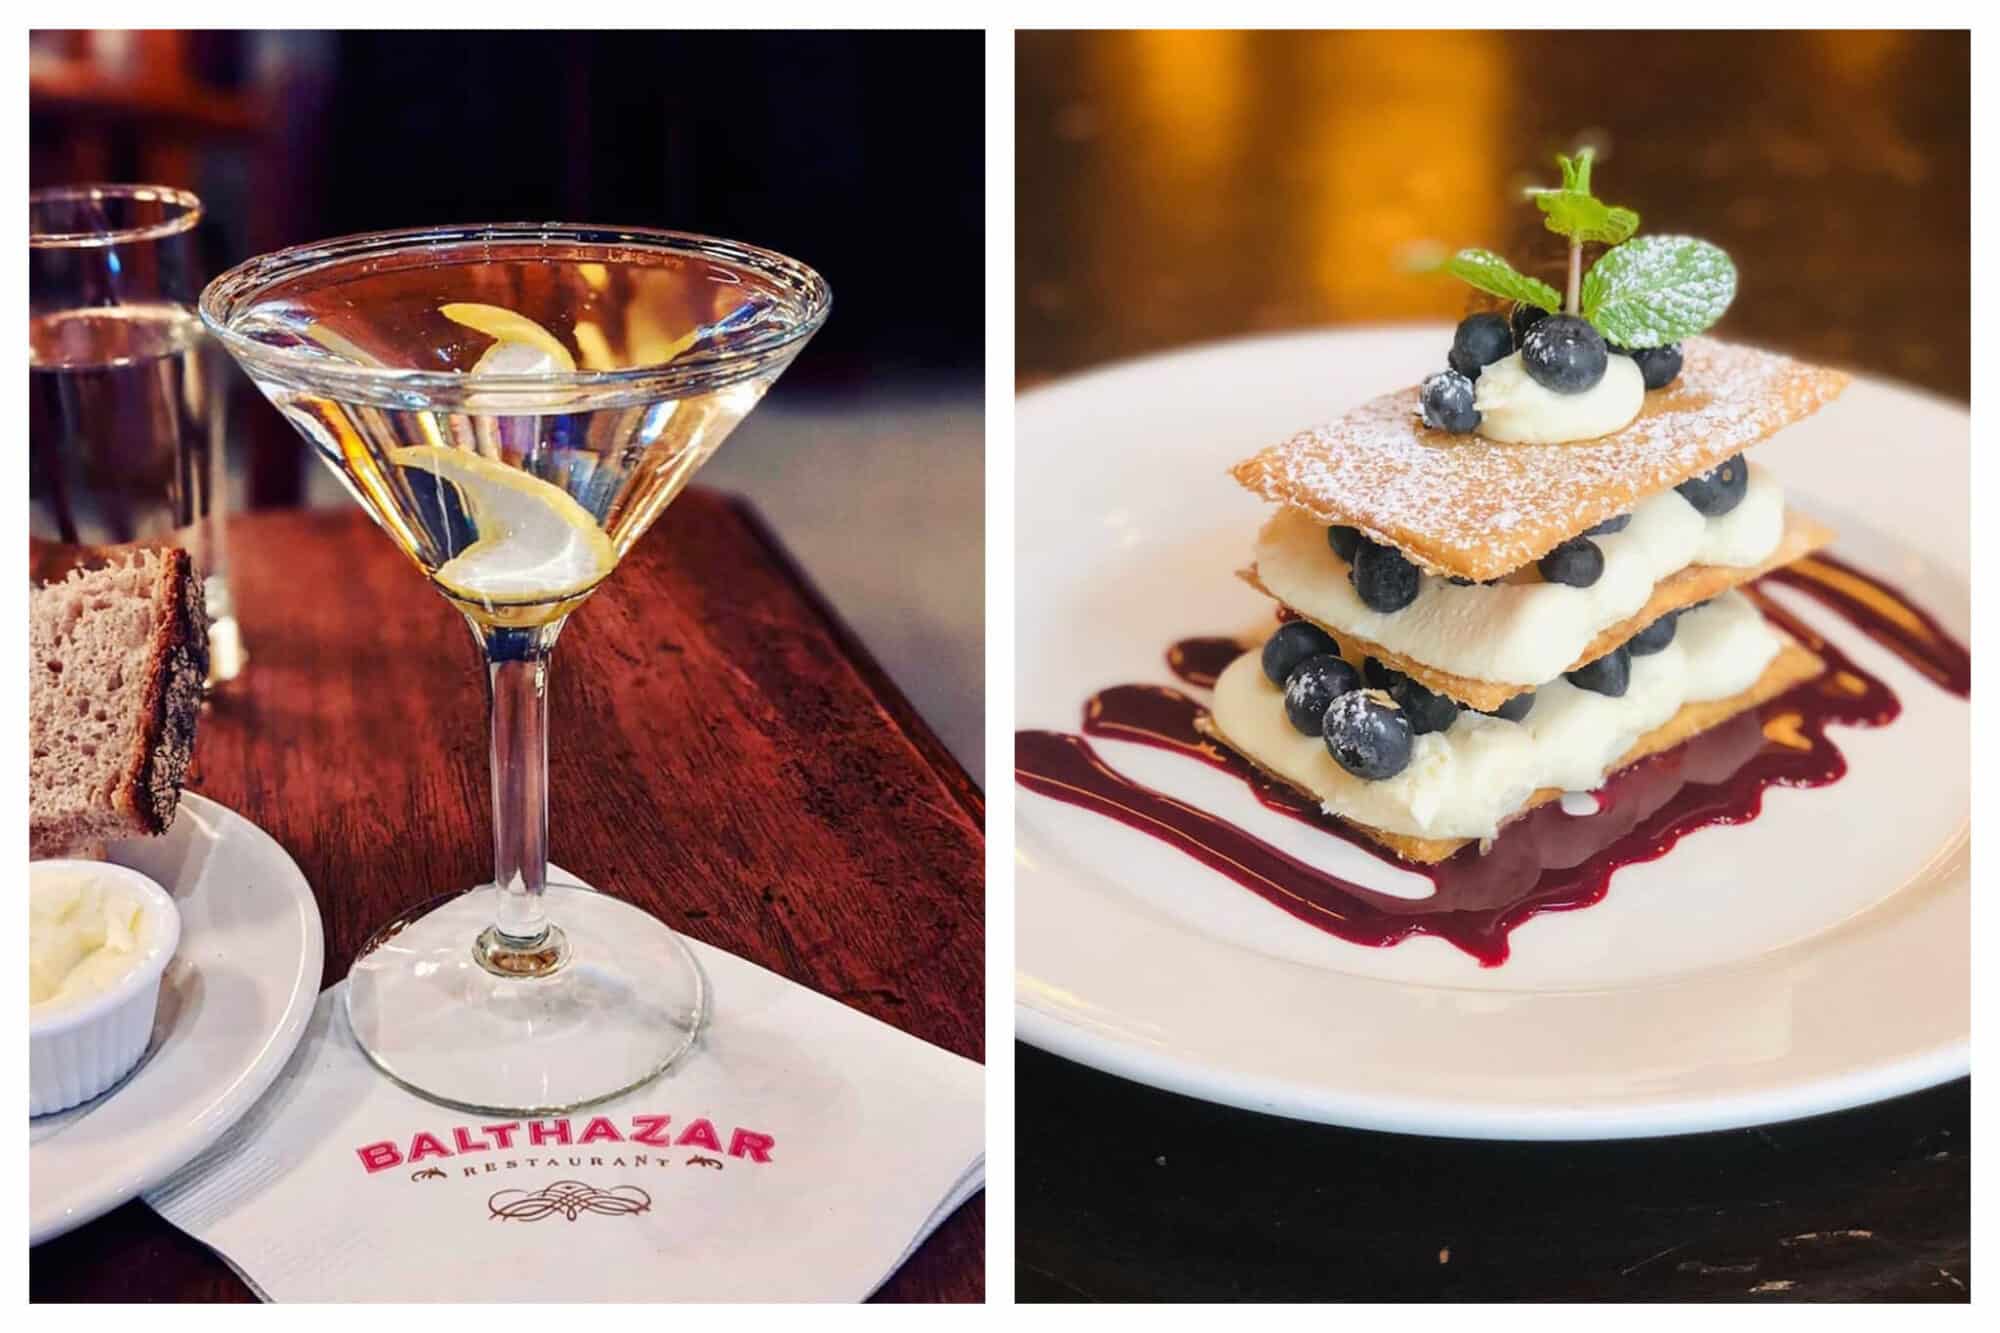 Left: A freshly made martini with a lemon slice sits atop a napkin, printed with the name of the restaurant, Balthazar, on it, Right: A delicious plate of dessert at Balthazar restaurant in NYC. topped with powdered sugar, blueberries and a sprig of mint